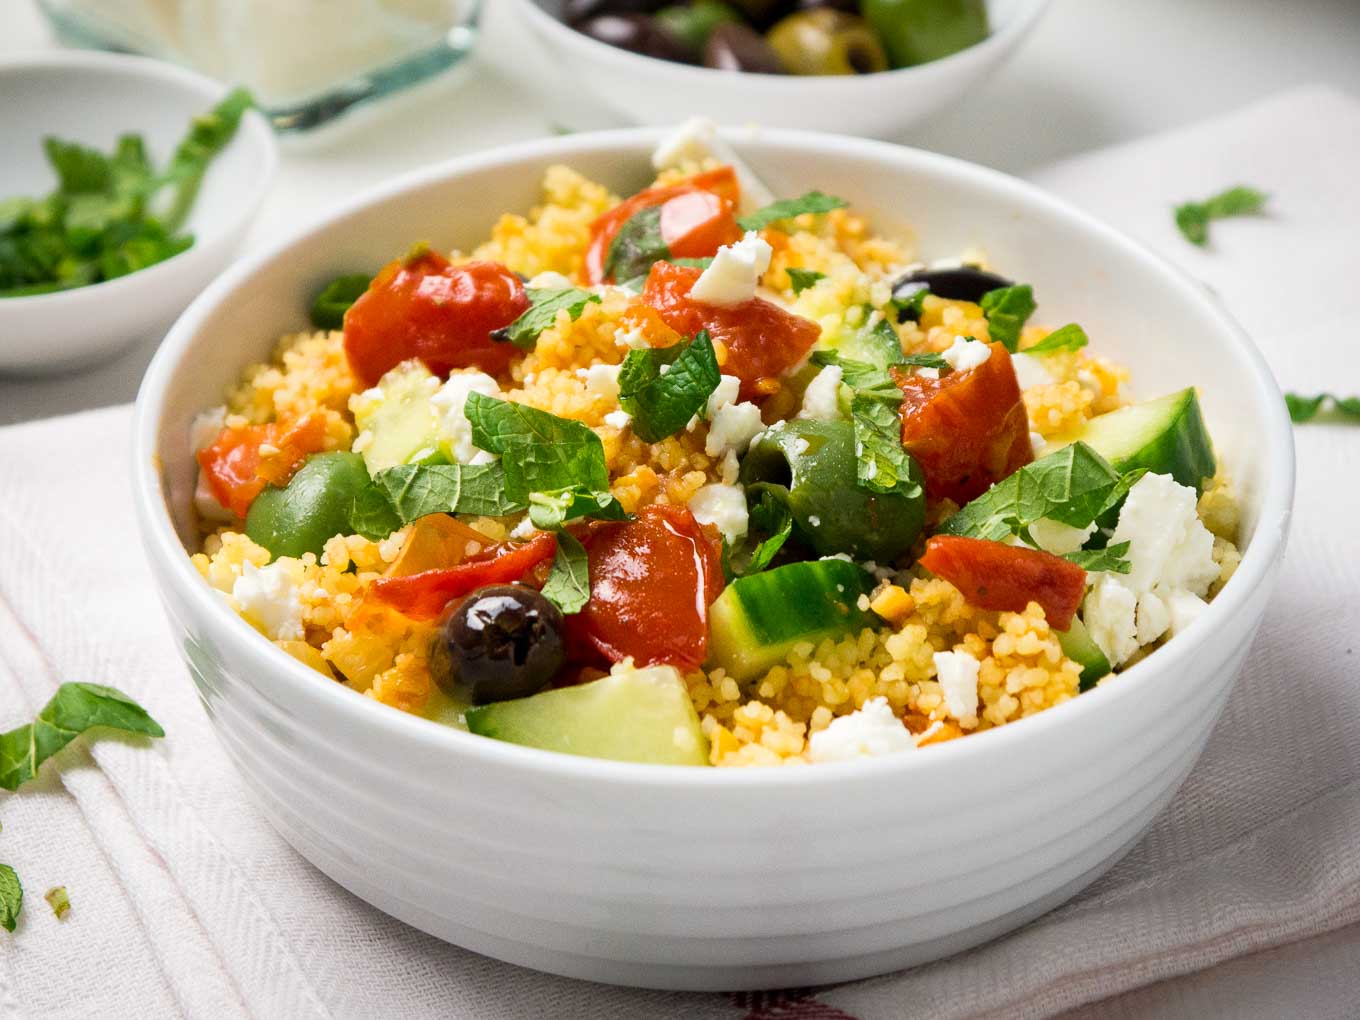 20-minute Greek Couscous Salad makes a great quick weeknight dinner but it's also perfect for parties! This easy recipe is sure to be a crowd-pleaser.